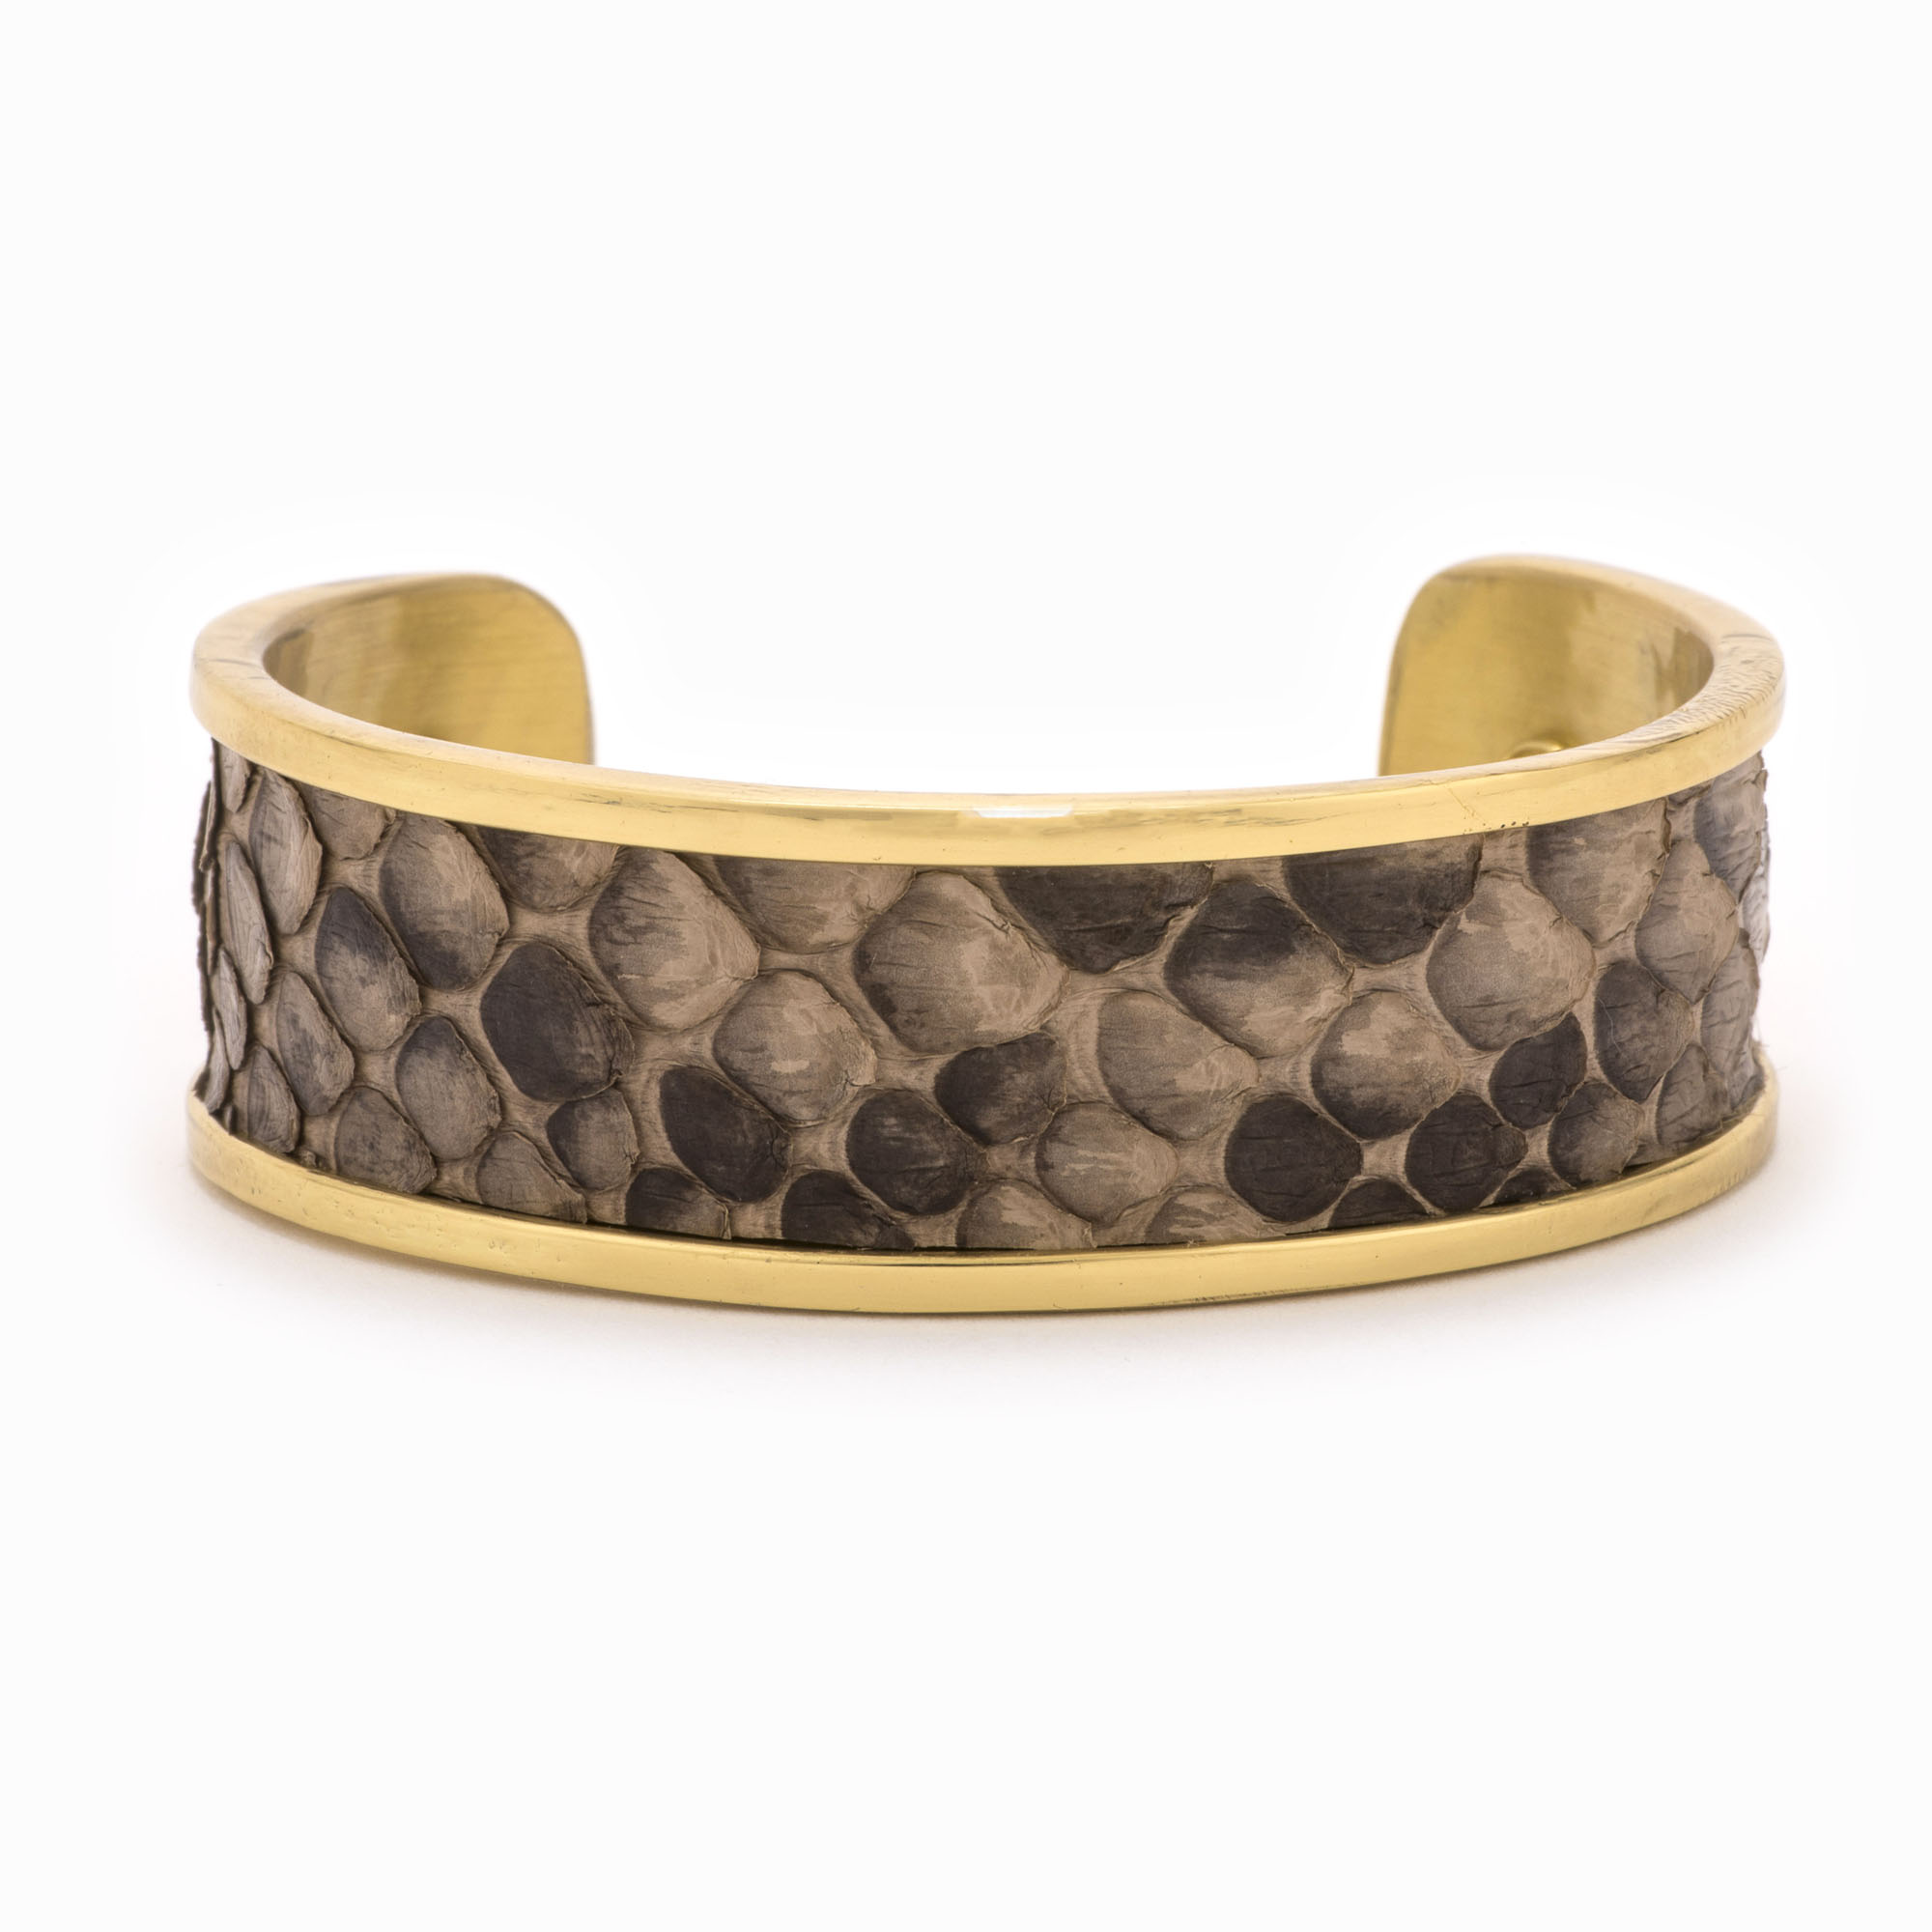 A medium gold cuff with grey and brown colored snakeskin pattern inlaid.